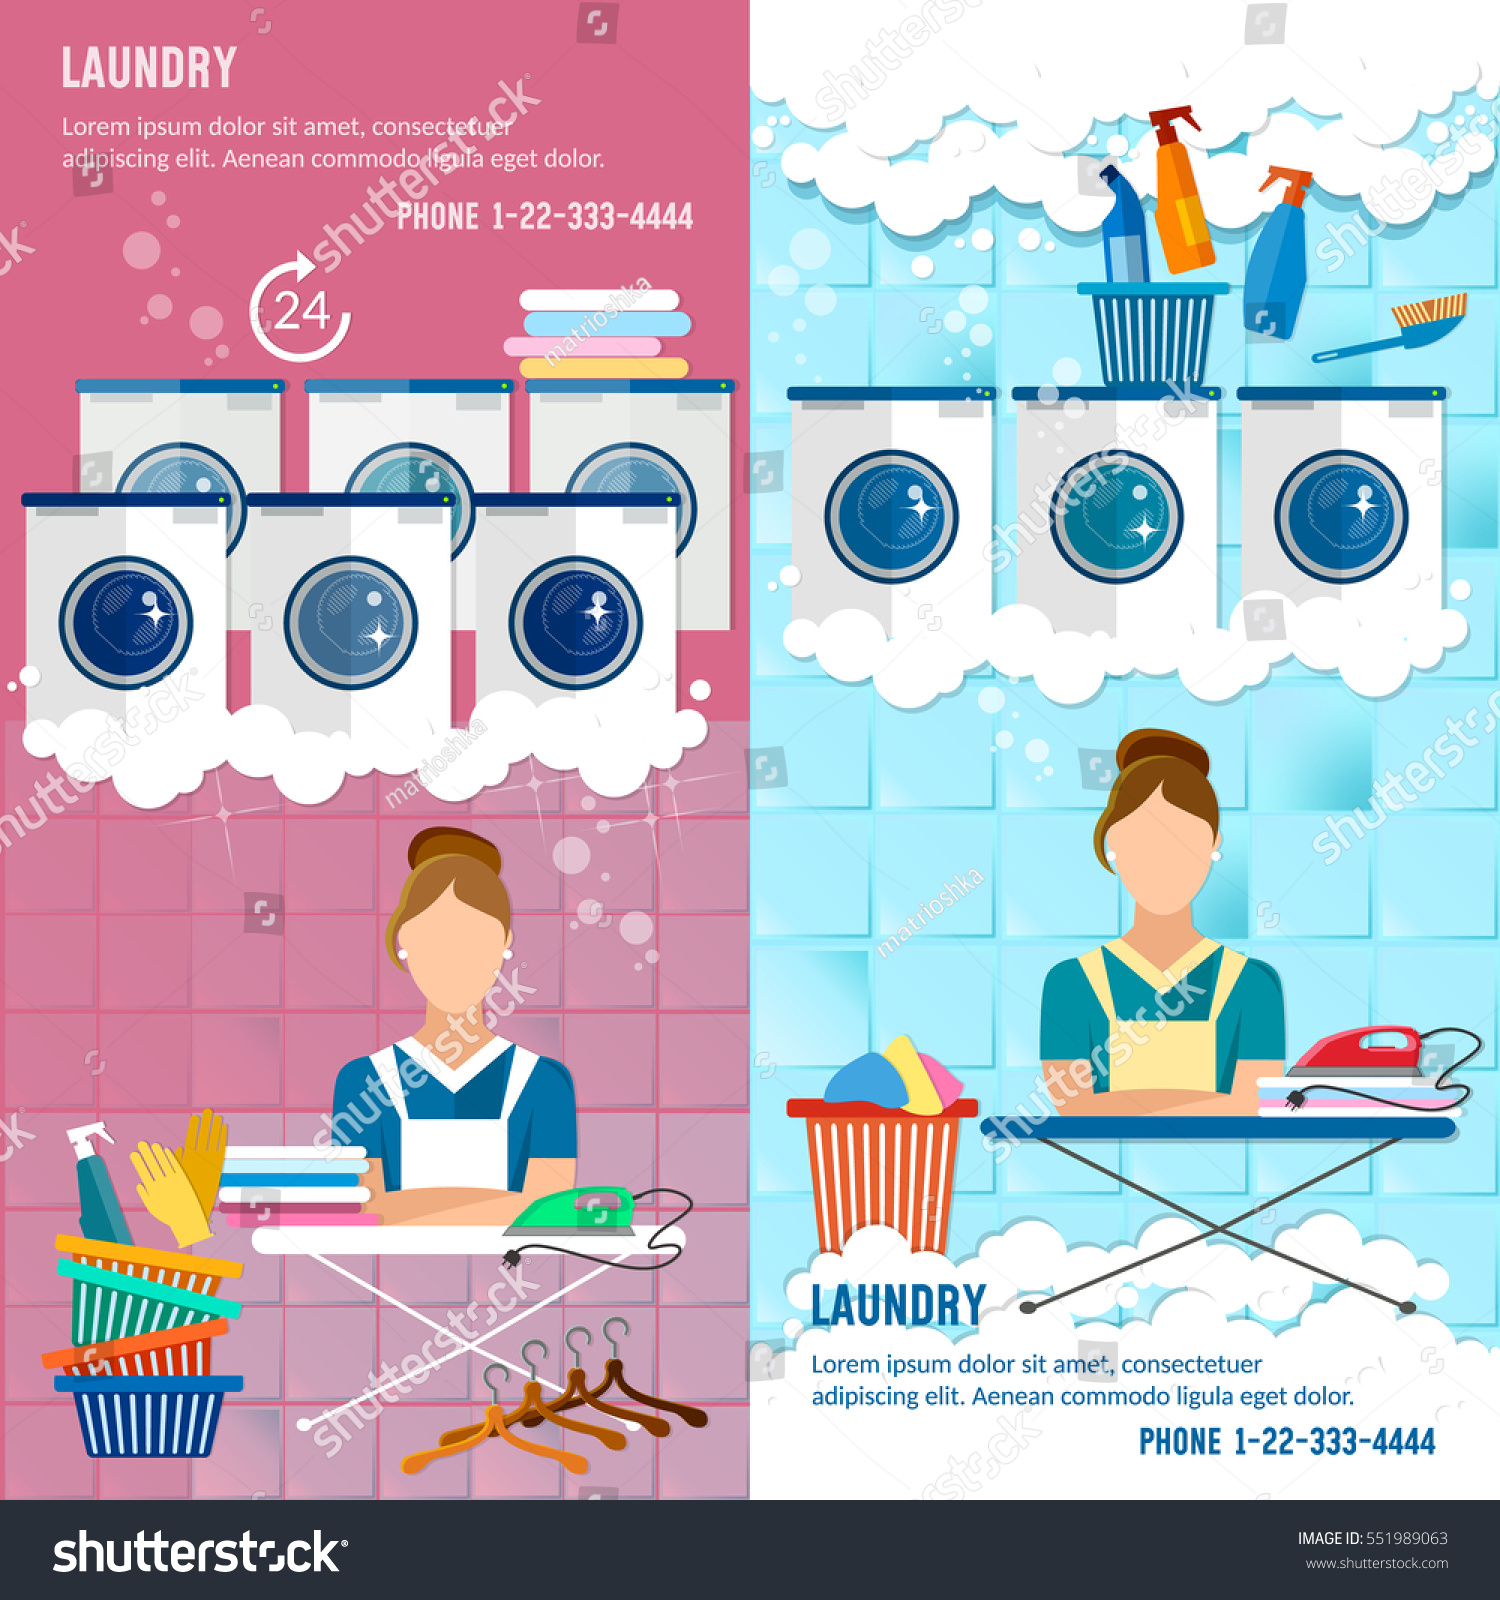 Laundry Service Banner Concept Laundry Room Stock Vector 